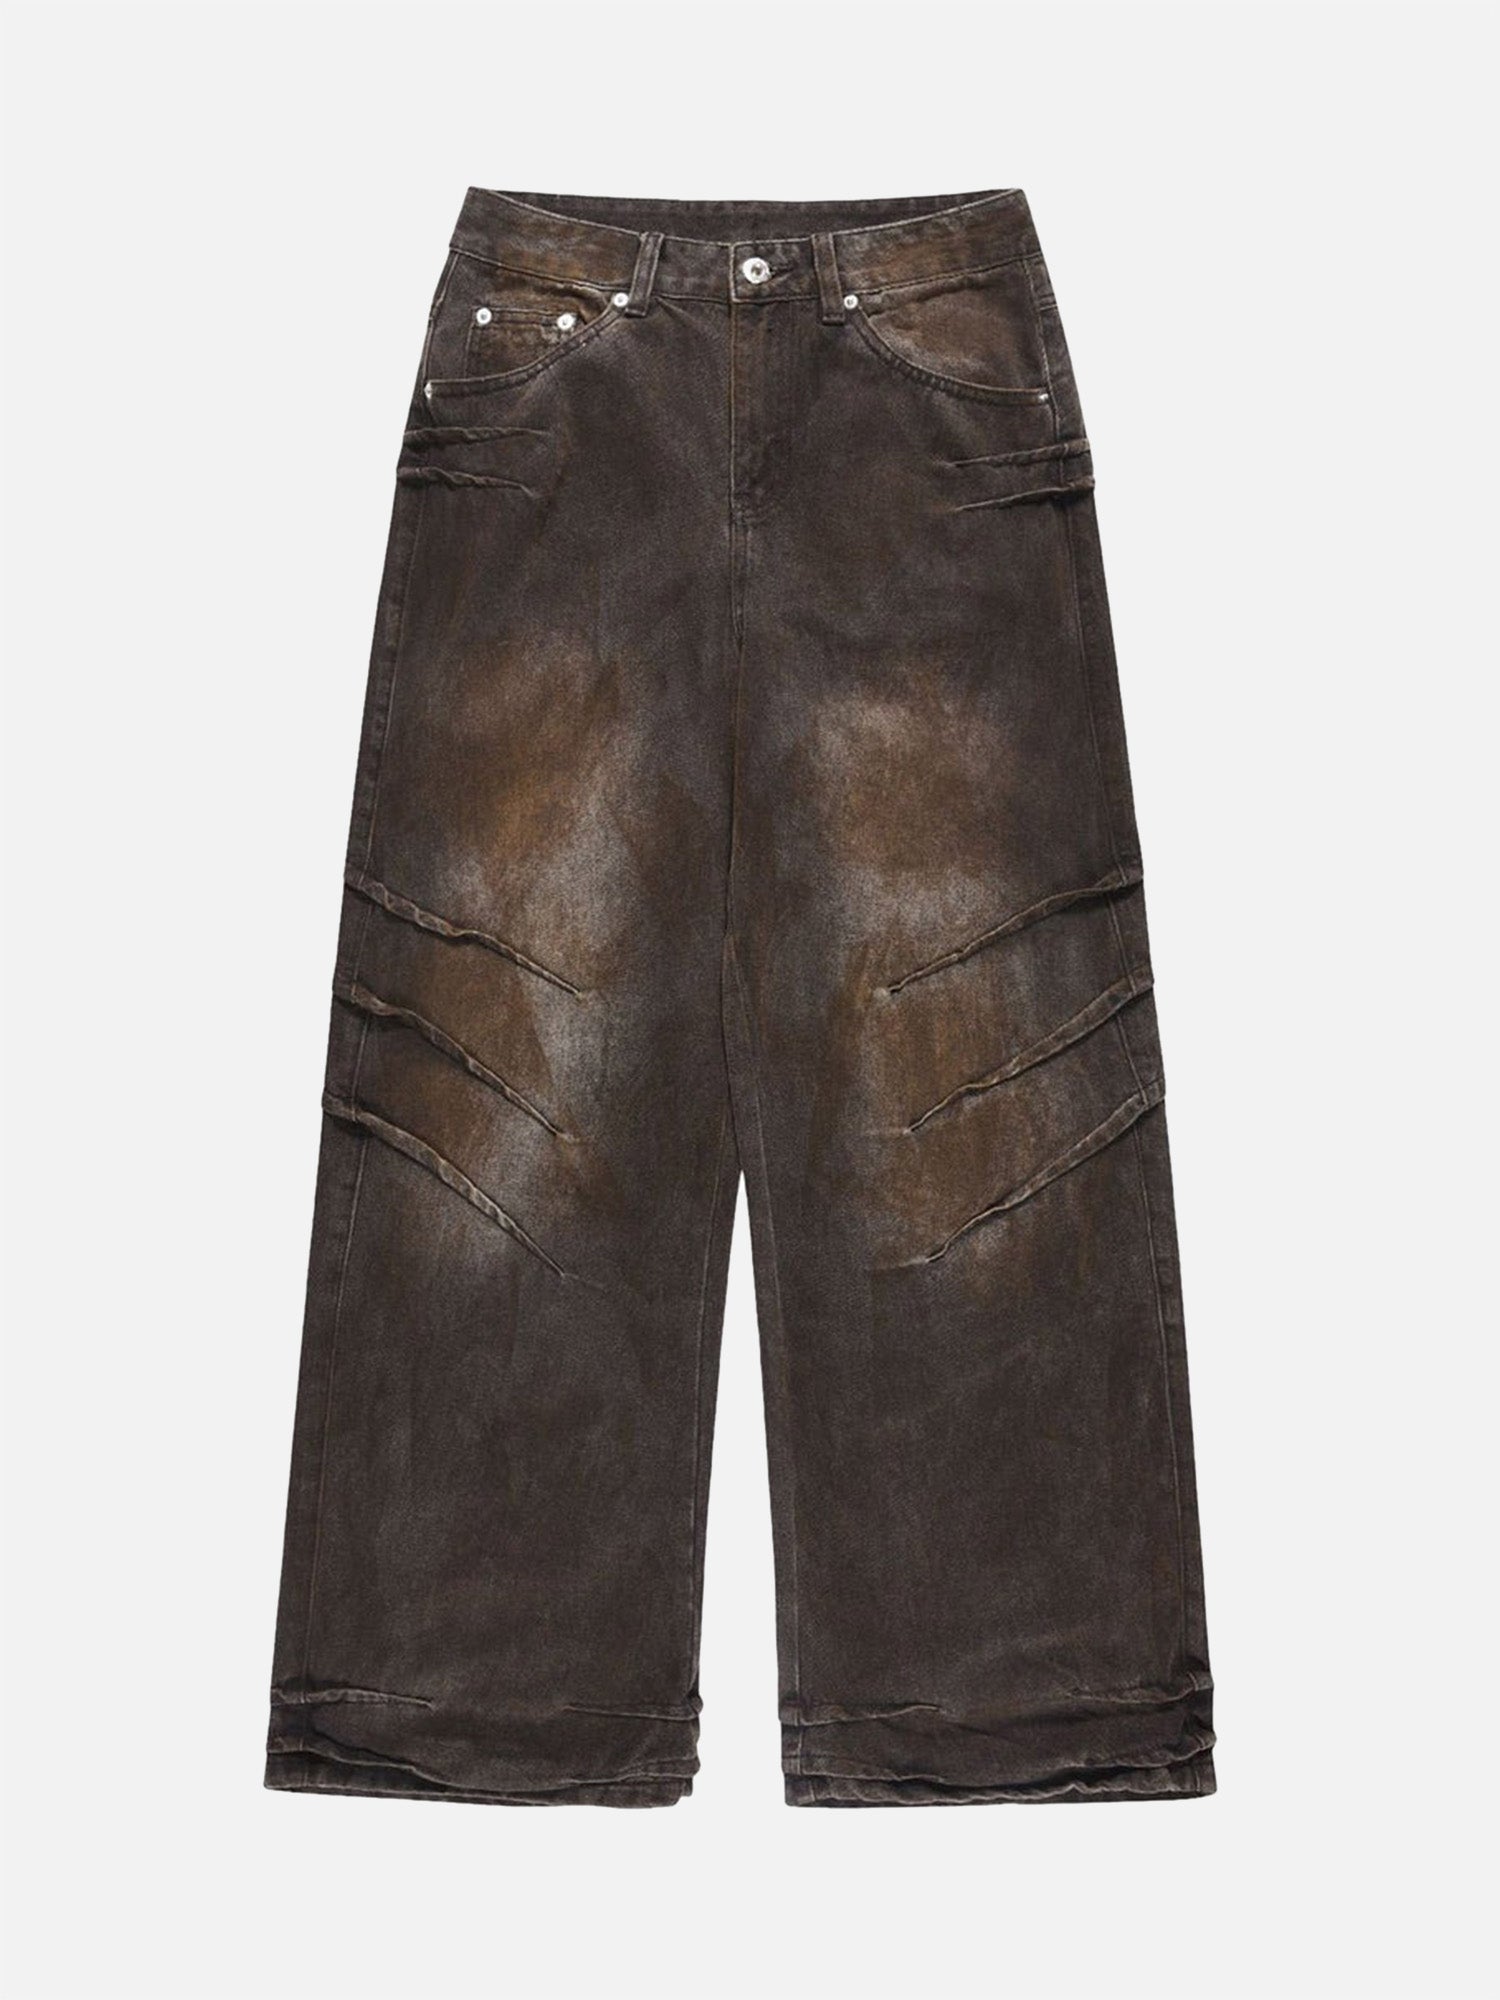 Thesupermade American Street Fashion Heavy Industry Washed Jeans